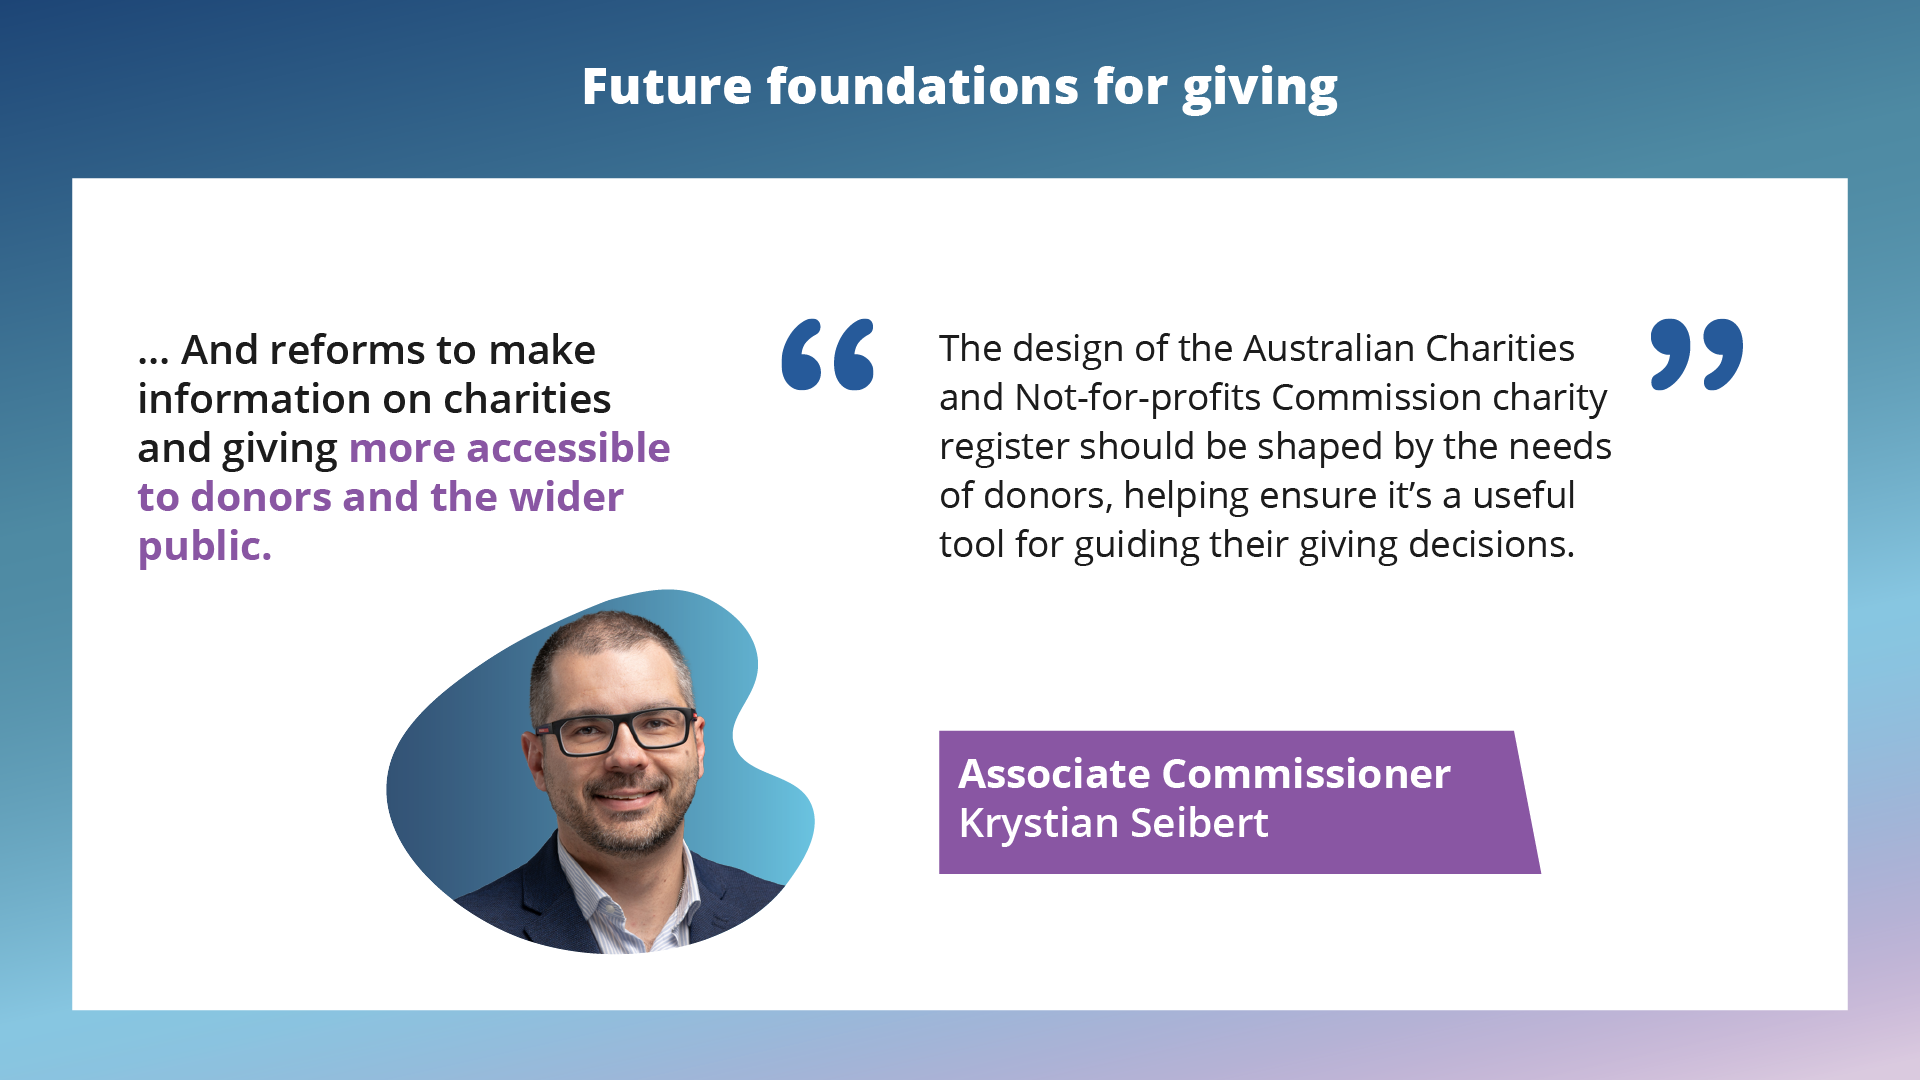 ... And reforms to make information on charities and giving more accessible to donors and the wider public. The design of the Australian Charities and Not-for-profits Commission charity register should be shaped by the needs of donors, helping ensure it’s a useful tool for guiding their giving decisions.Associate Commissioner Krystian Seibert.